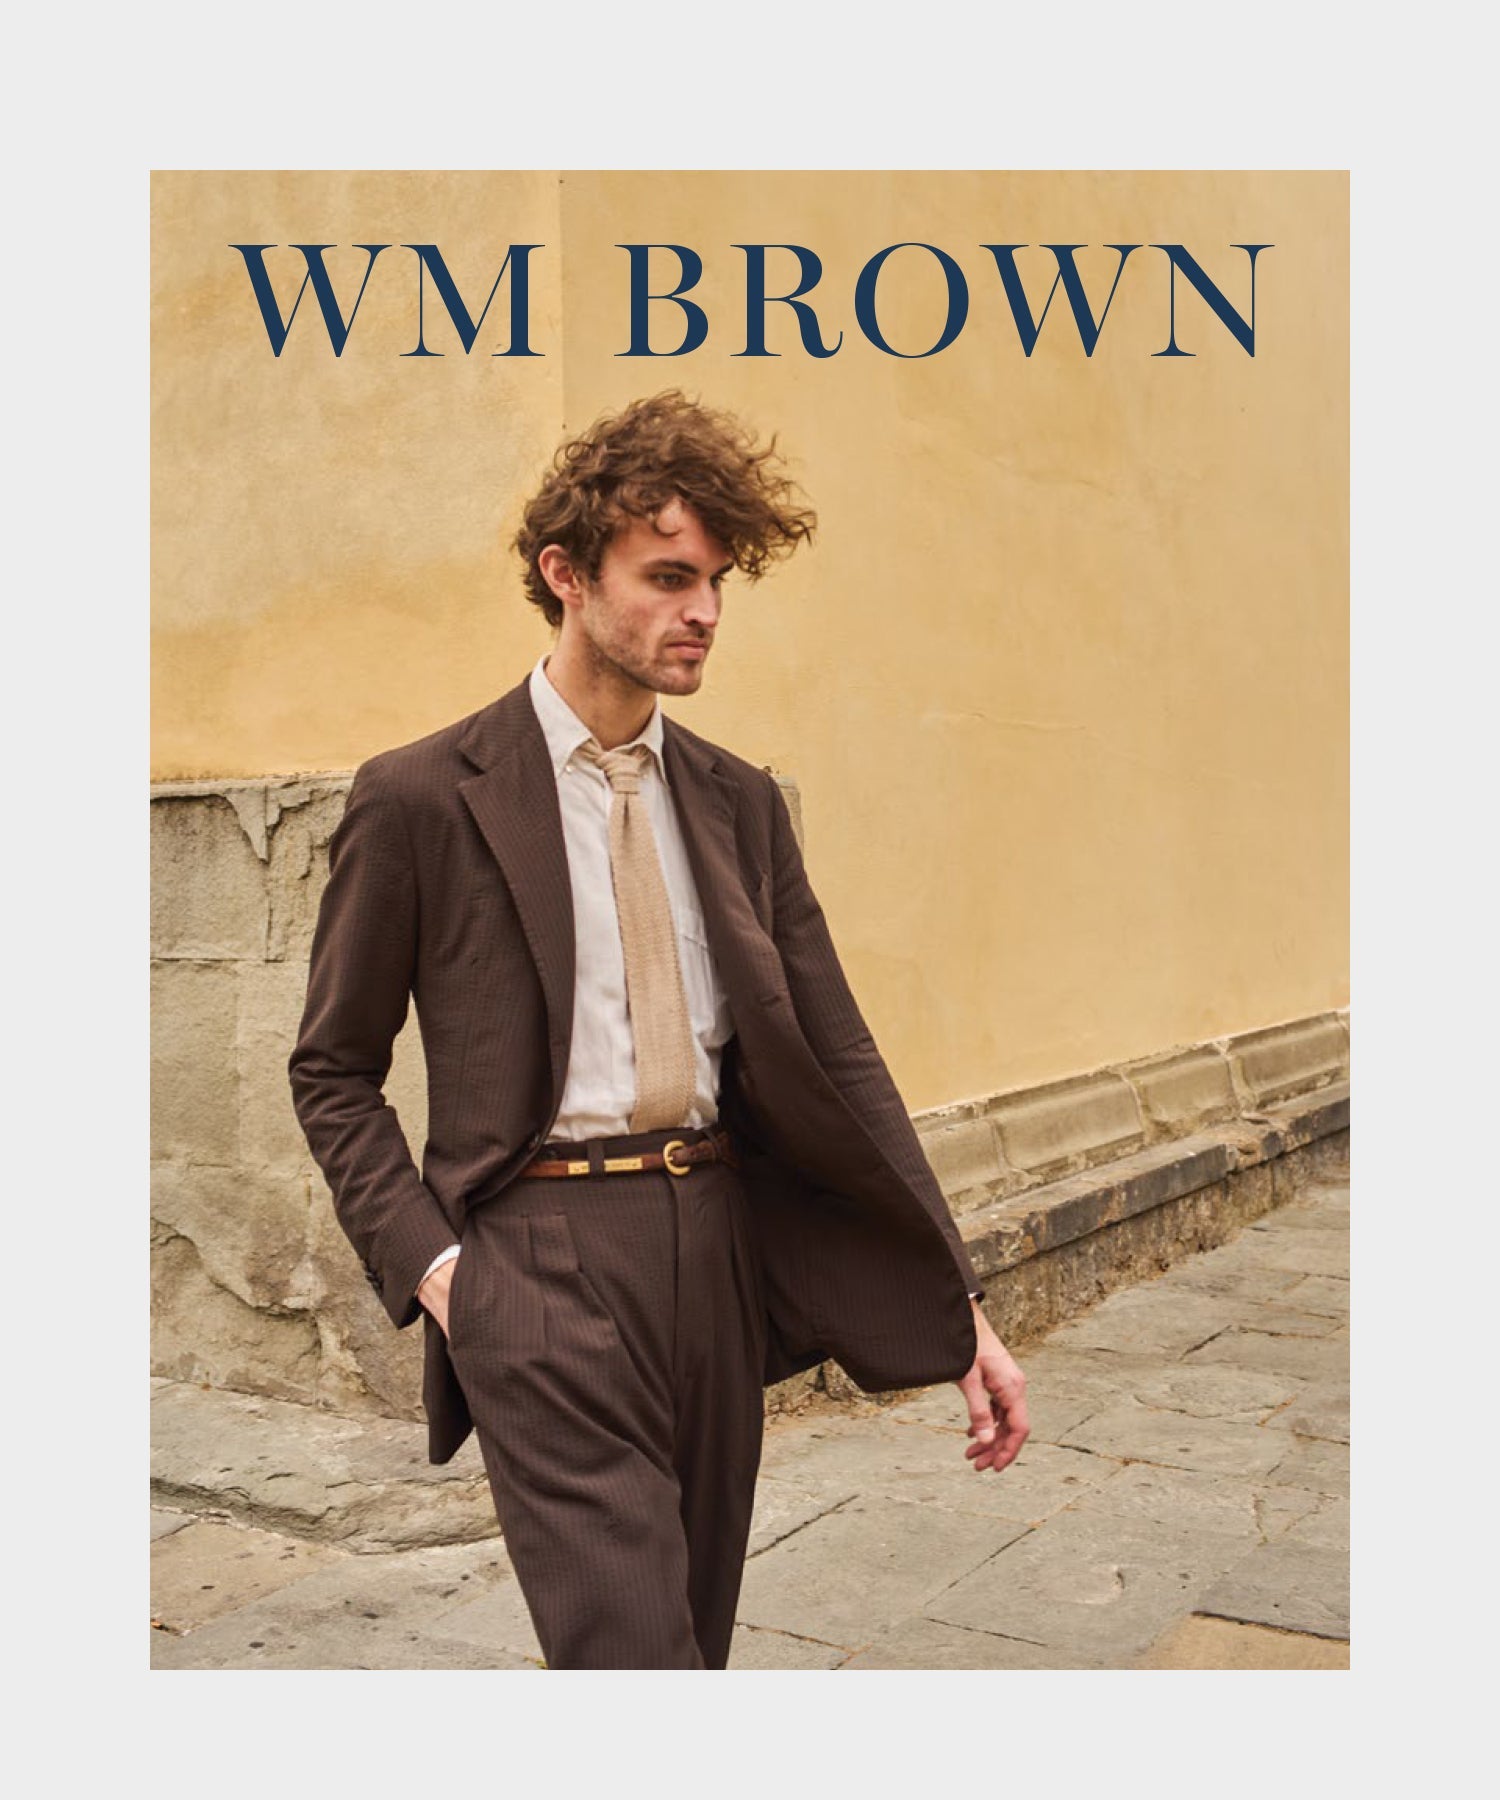 WMBROWN " ISSUE 14 "